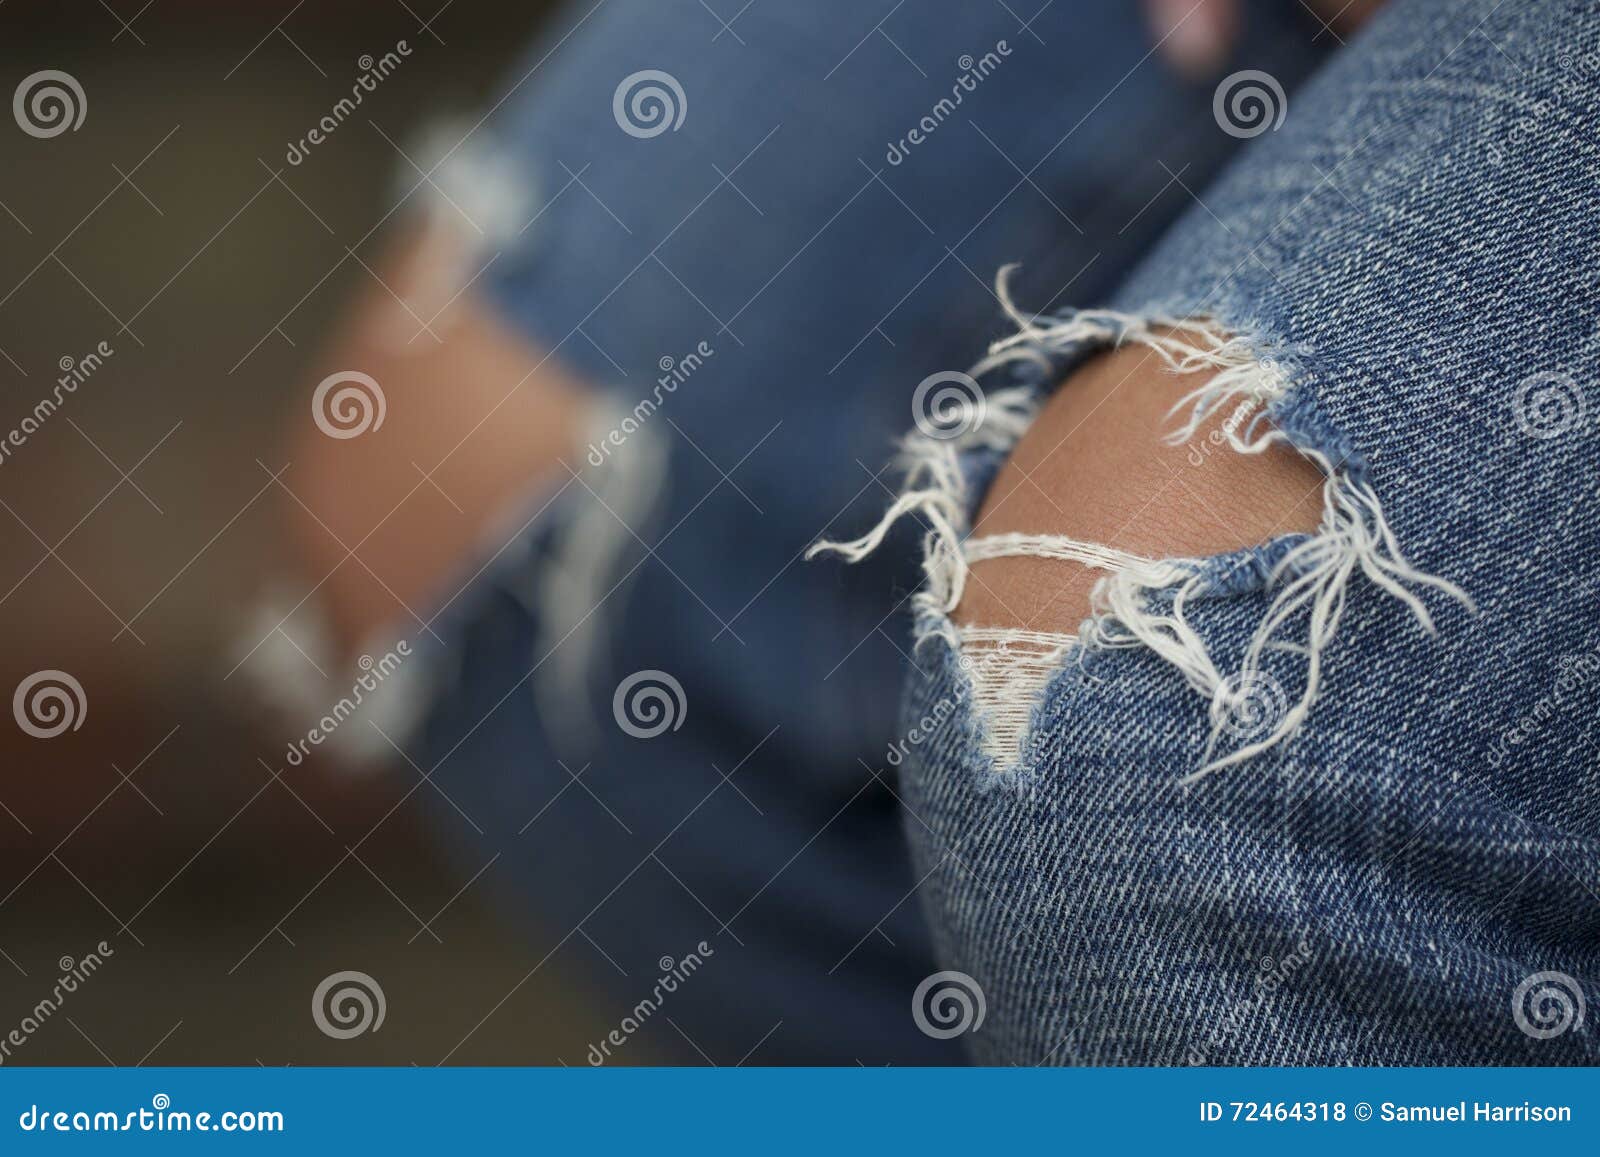 Torn Jeans stock photo. Image of jeans, knees, clothing - 72464318